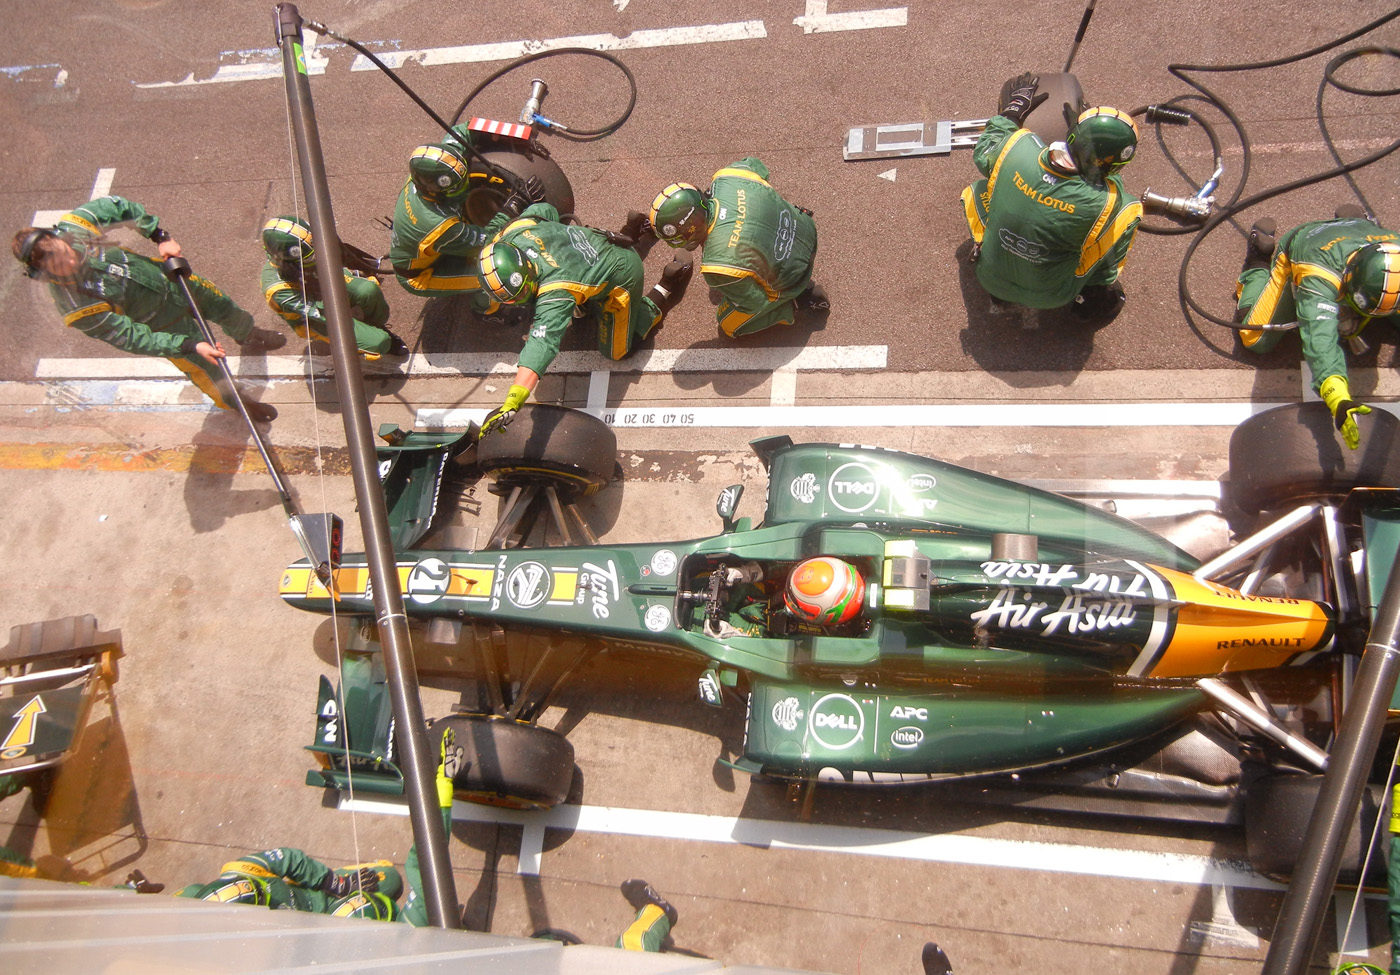 Photo by Dell Inc. of Team Lotus car in the pit lane during the race) [CC BY 2.0 (https://creativecommons.org/licenses/by/2.0)], via Wikimedia Commons.